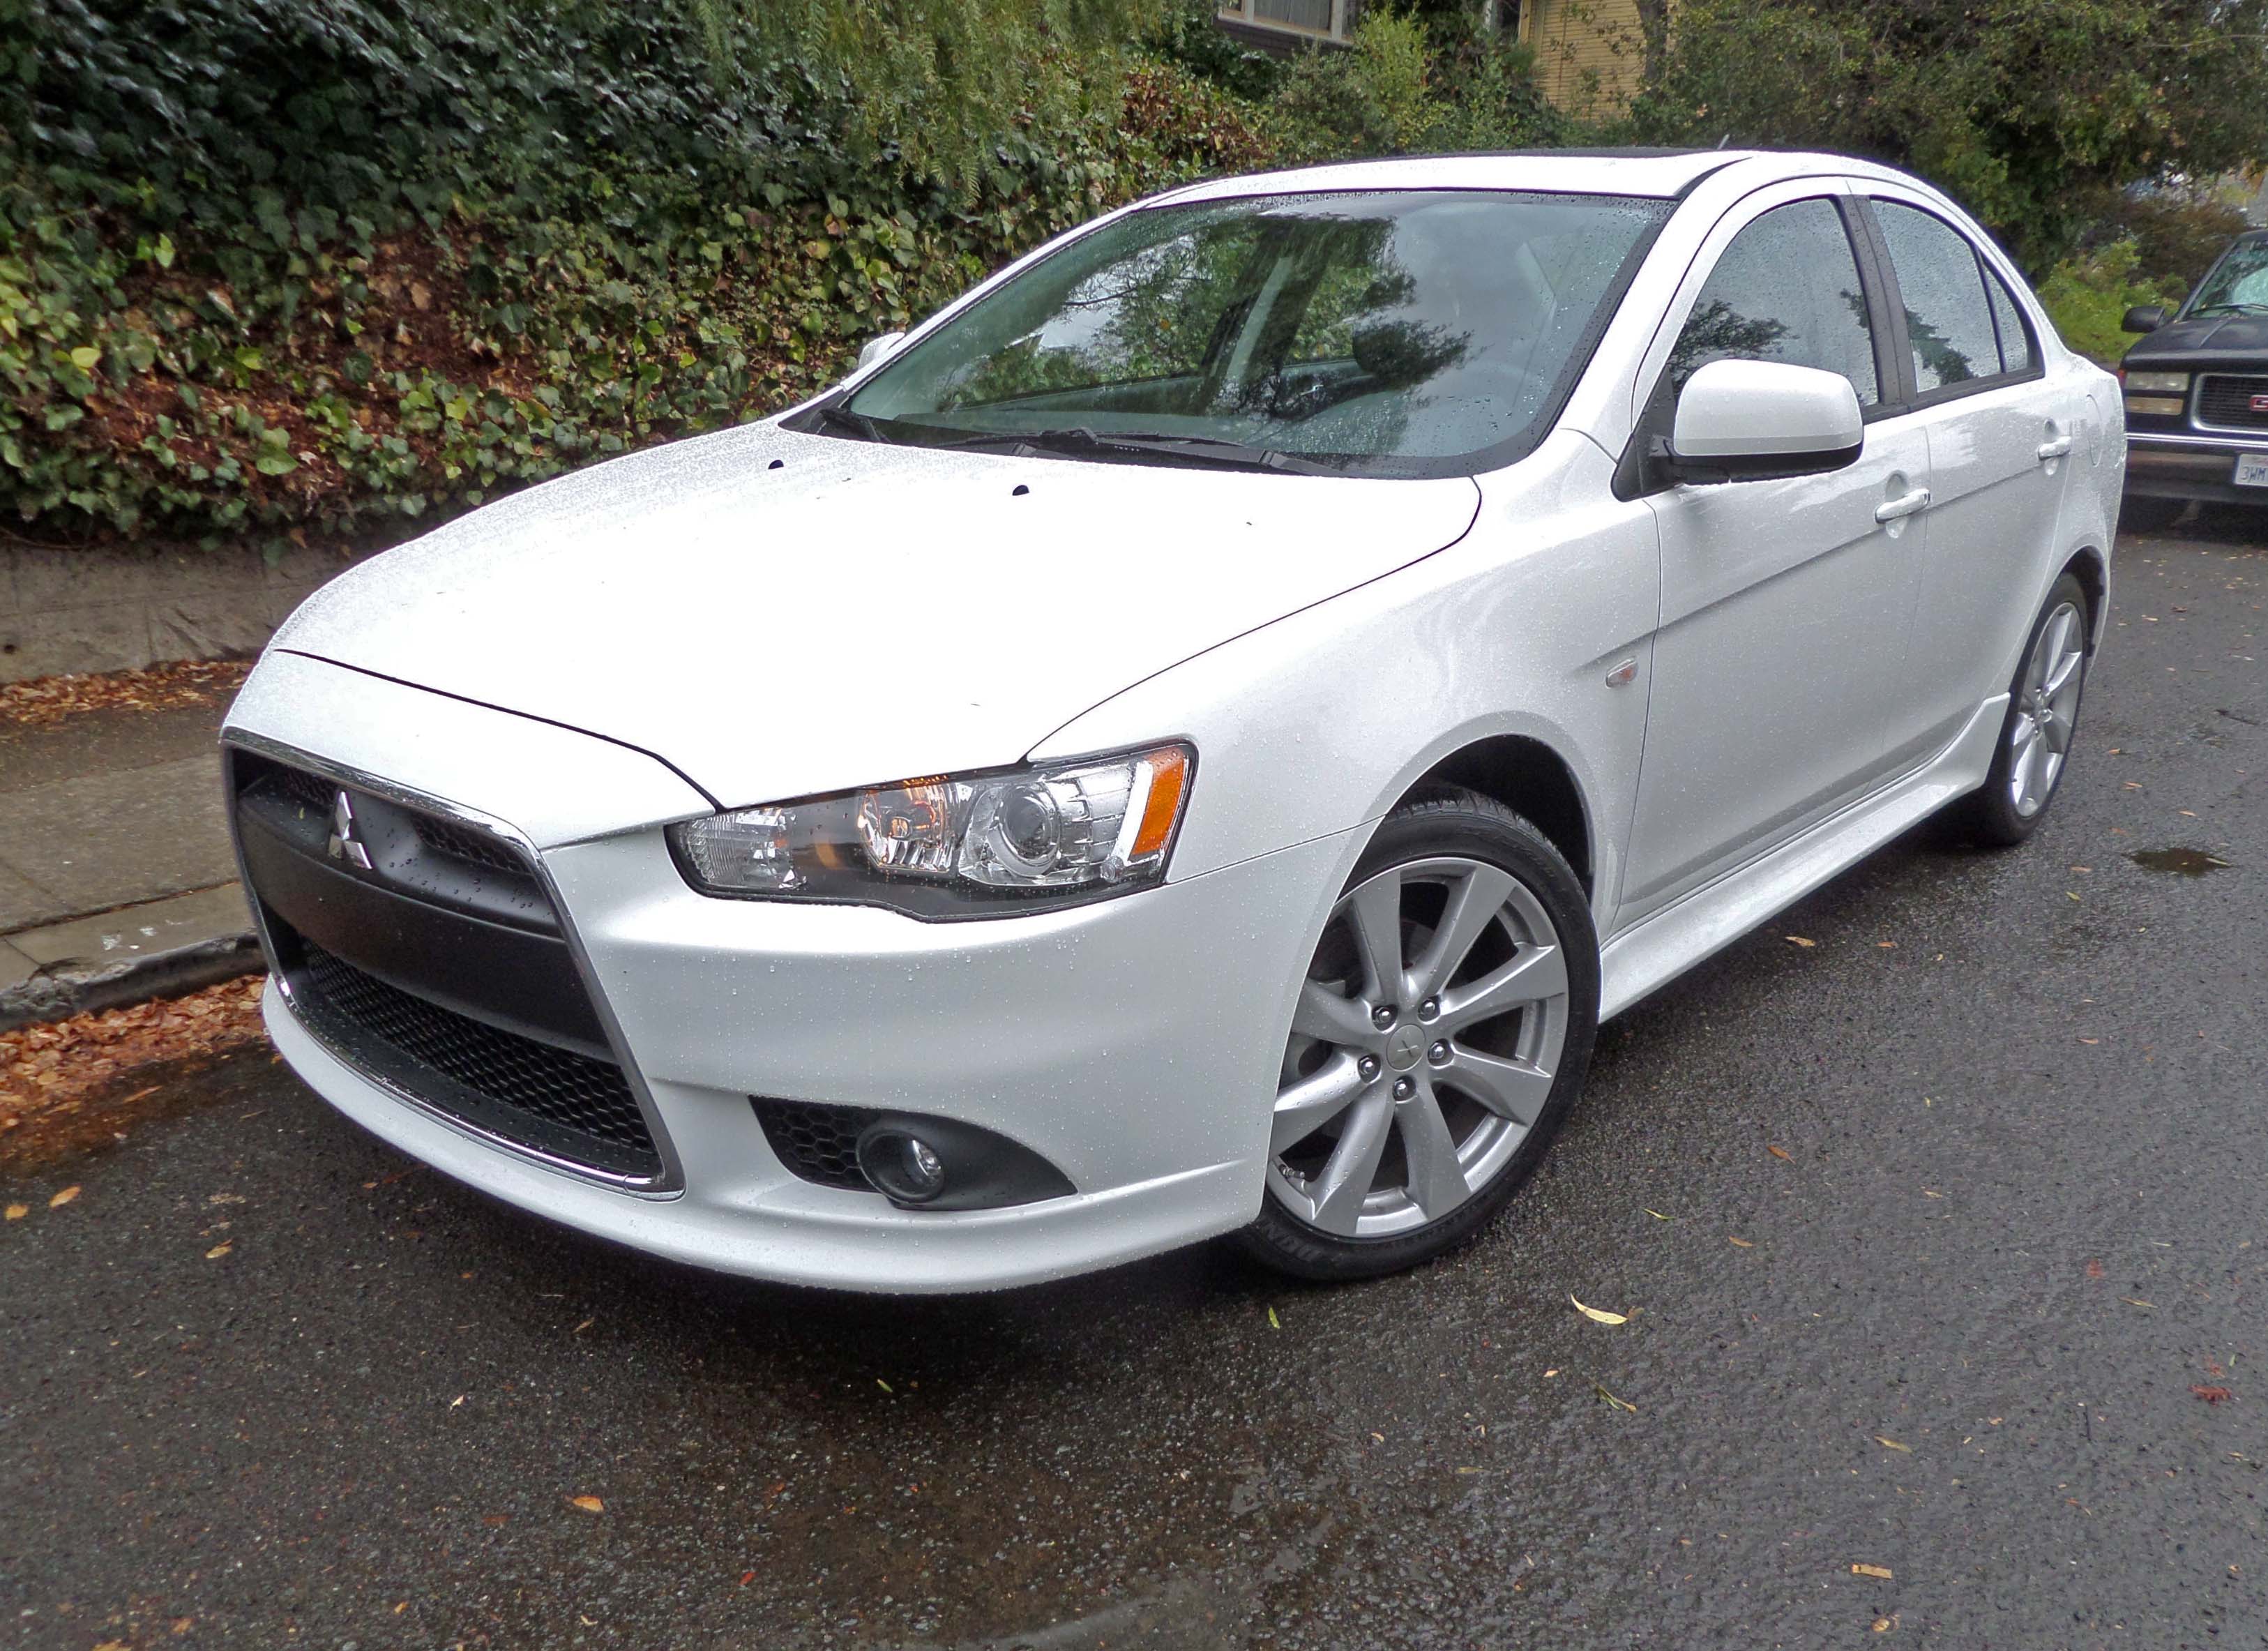 2014 Mitsubishi Lancer GT Test Drive | Our Auto Expert